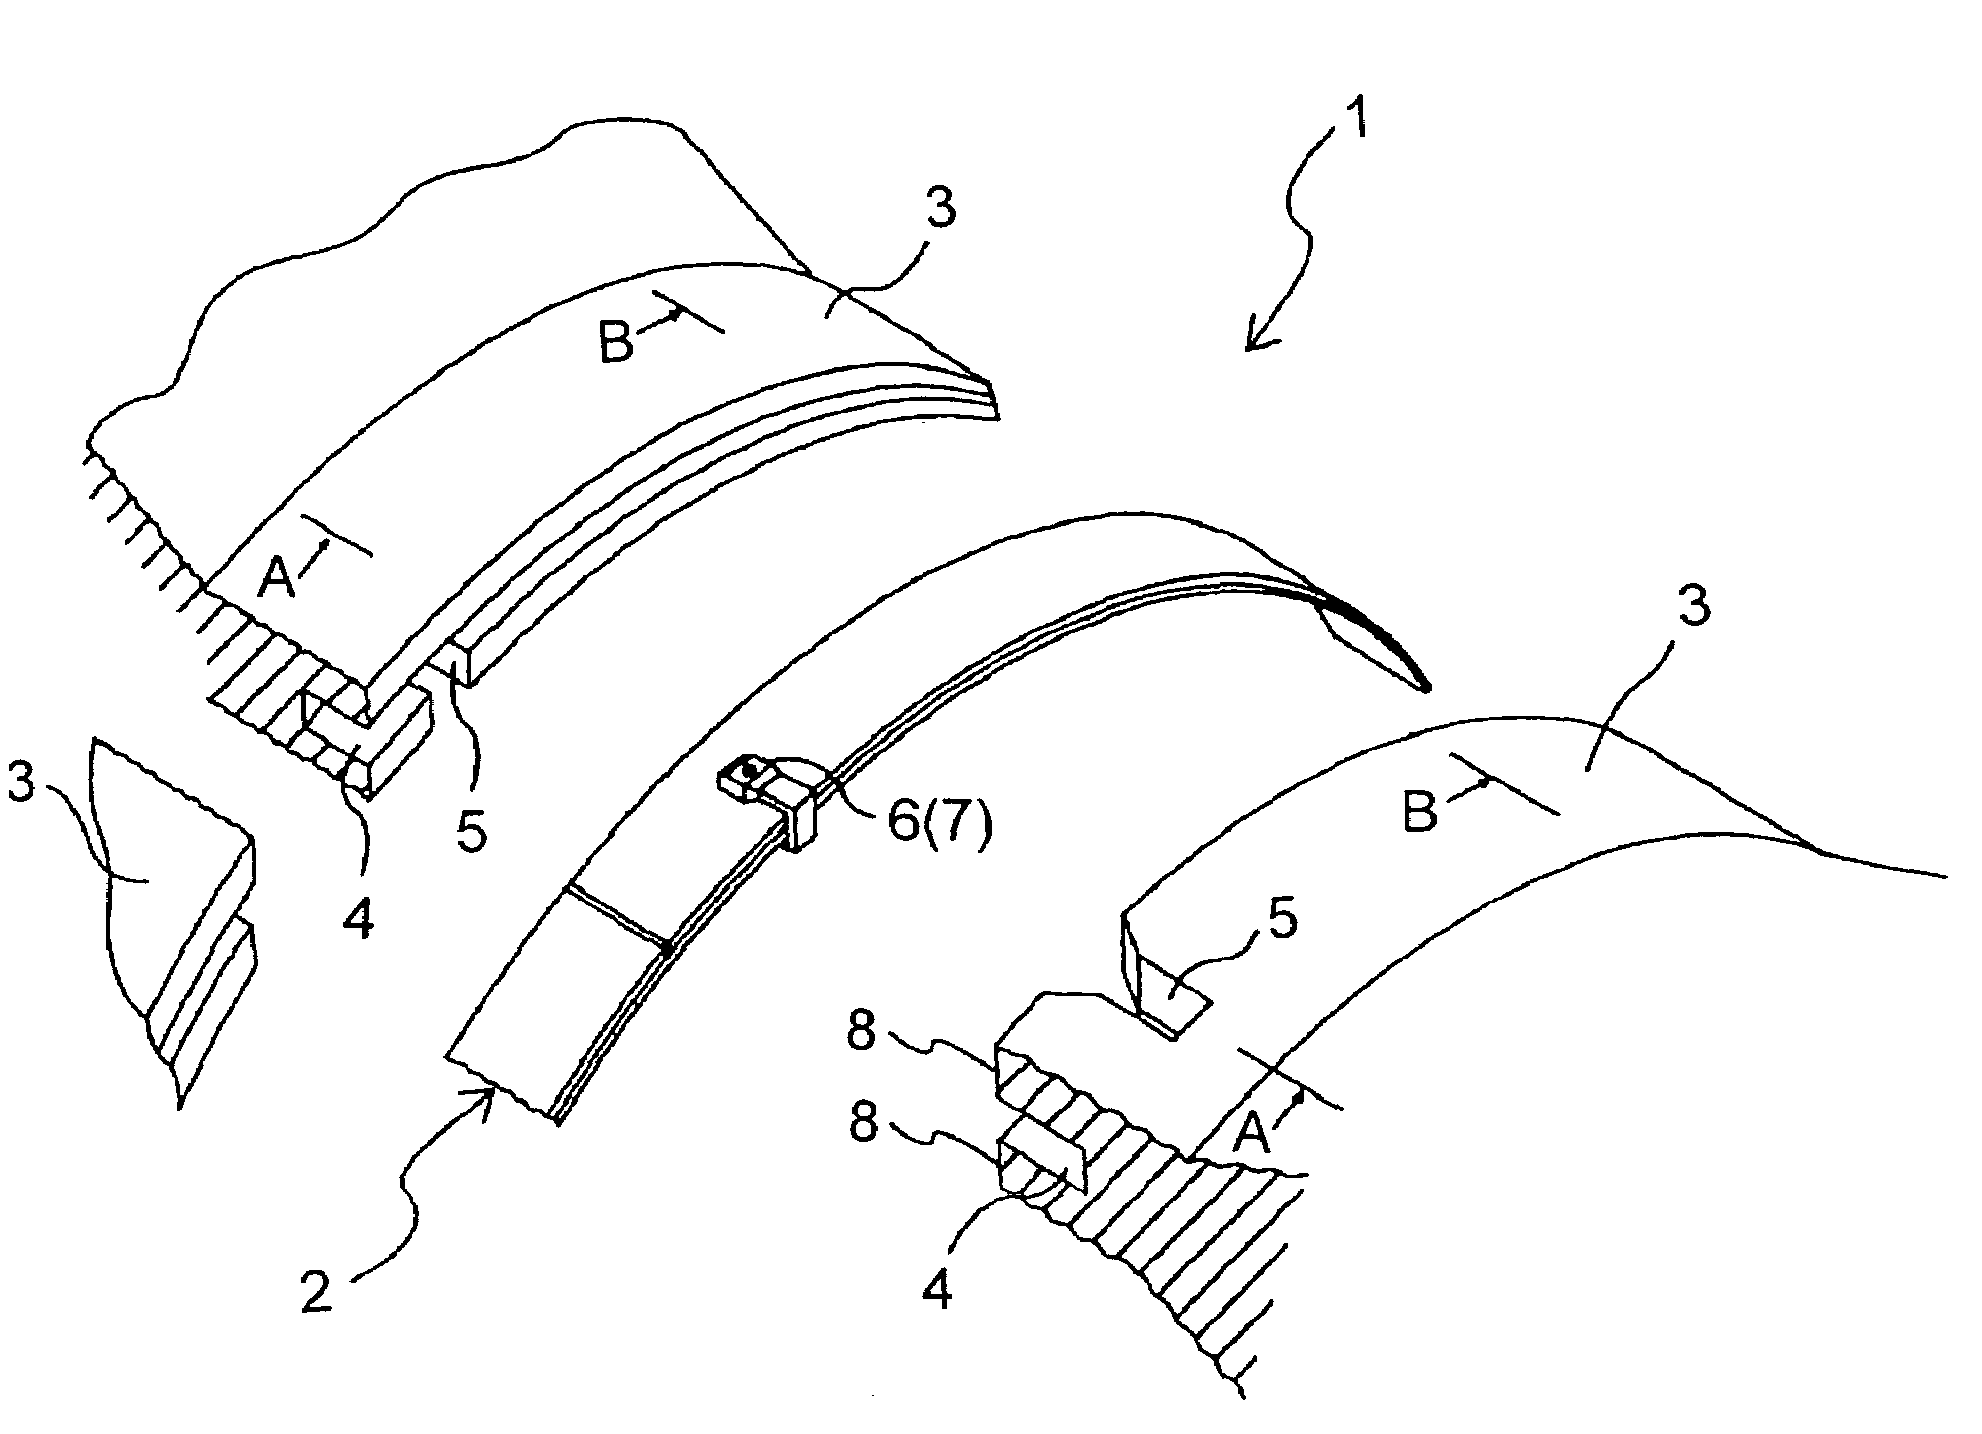 Gas turbine having a sealing structure